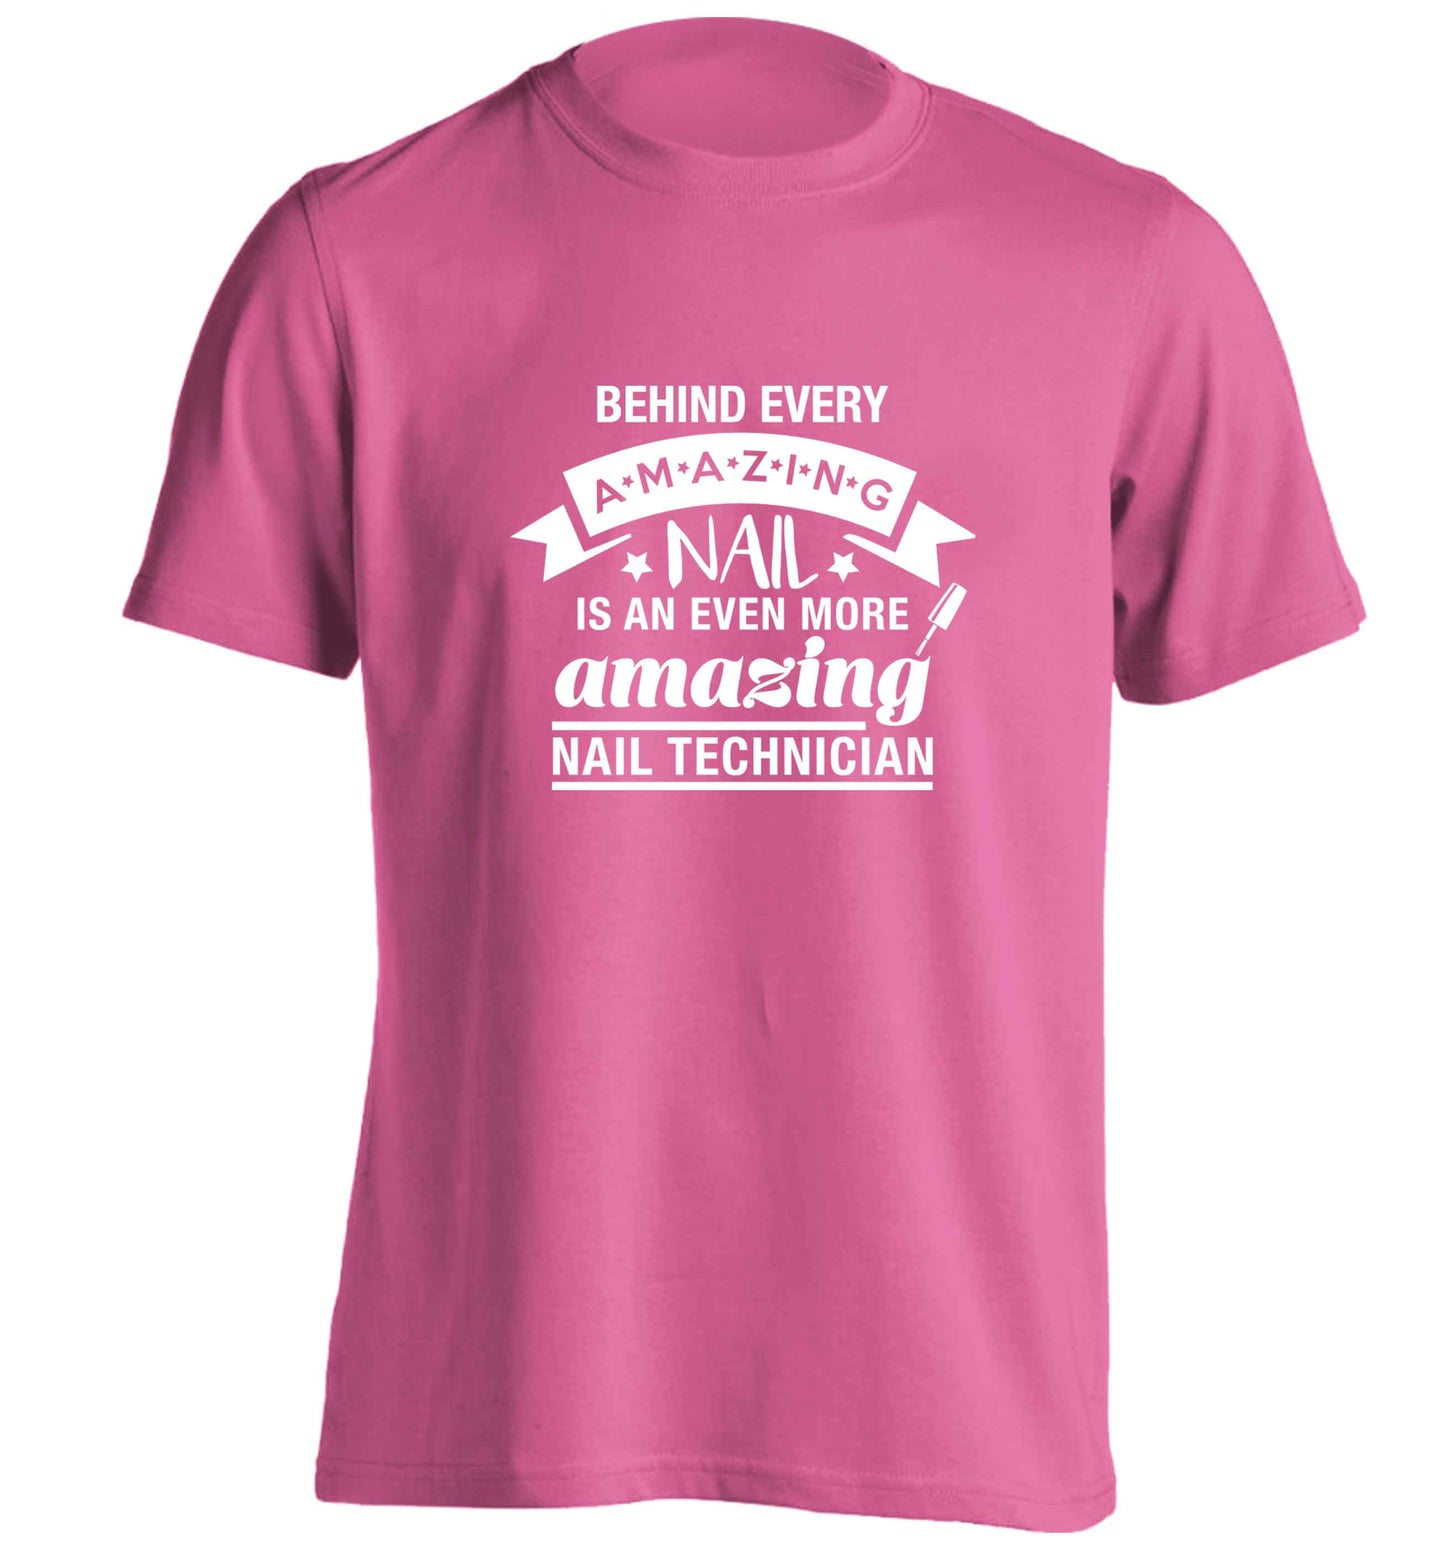 Behind every amazing nail is an even more amazing nail technician adults unisex pink Tshirt 2XL